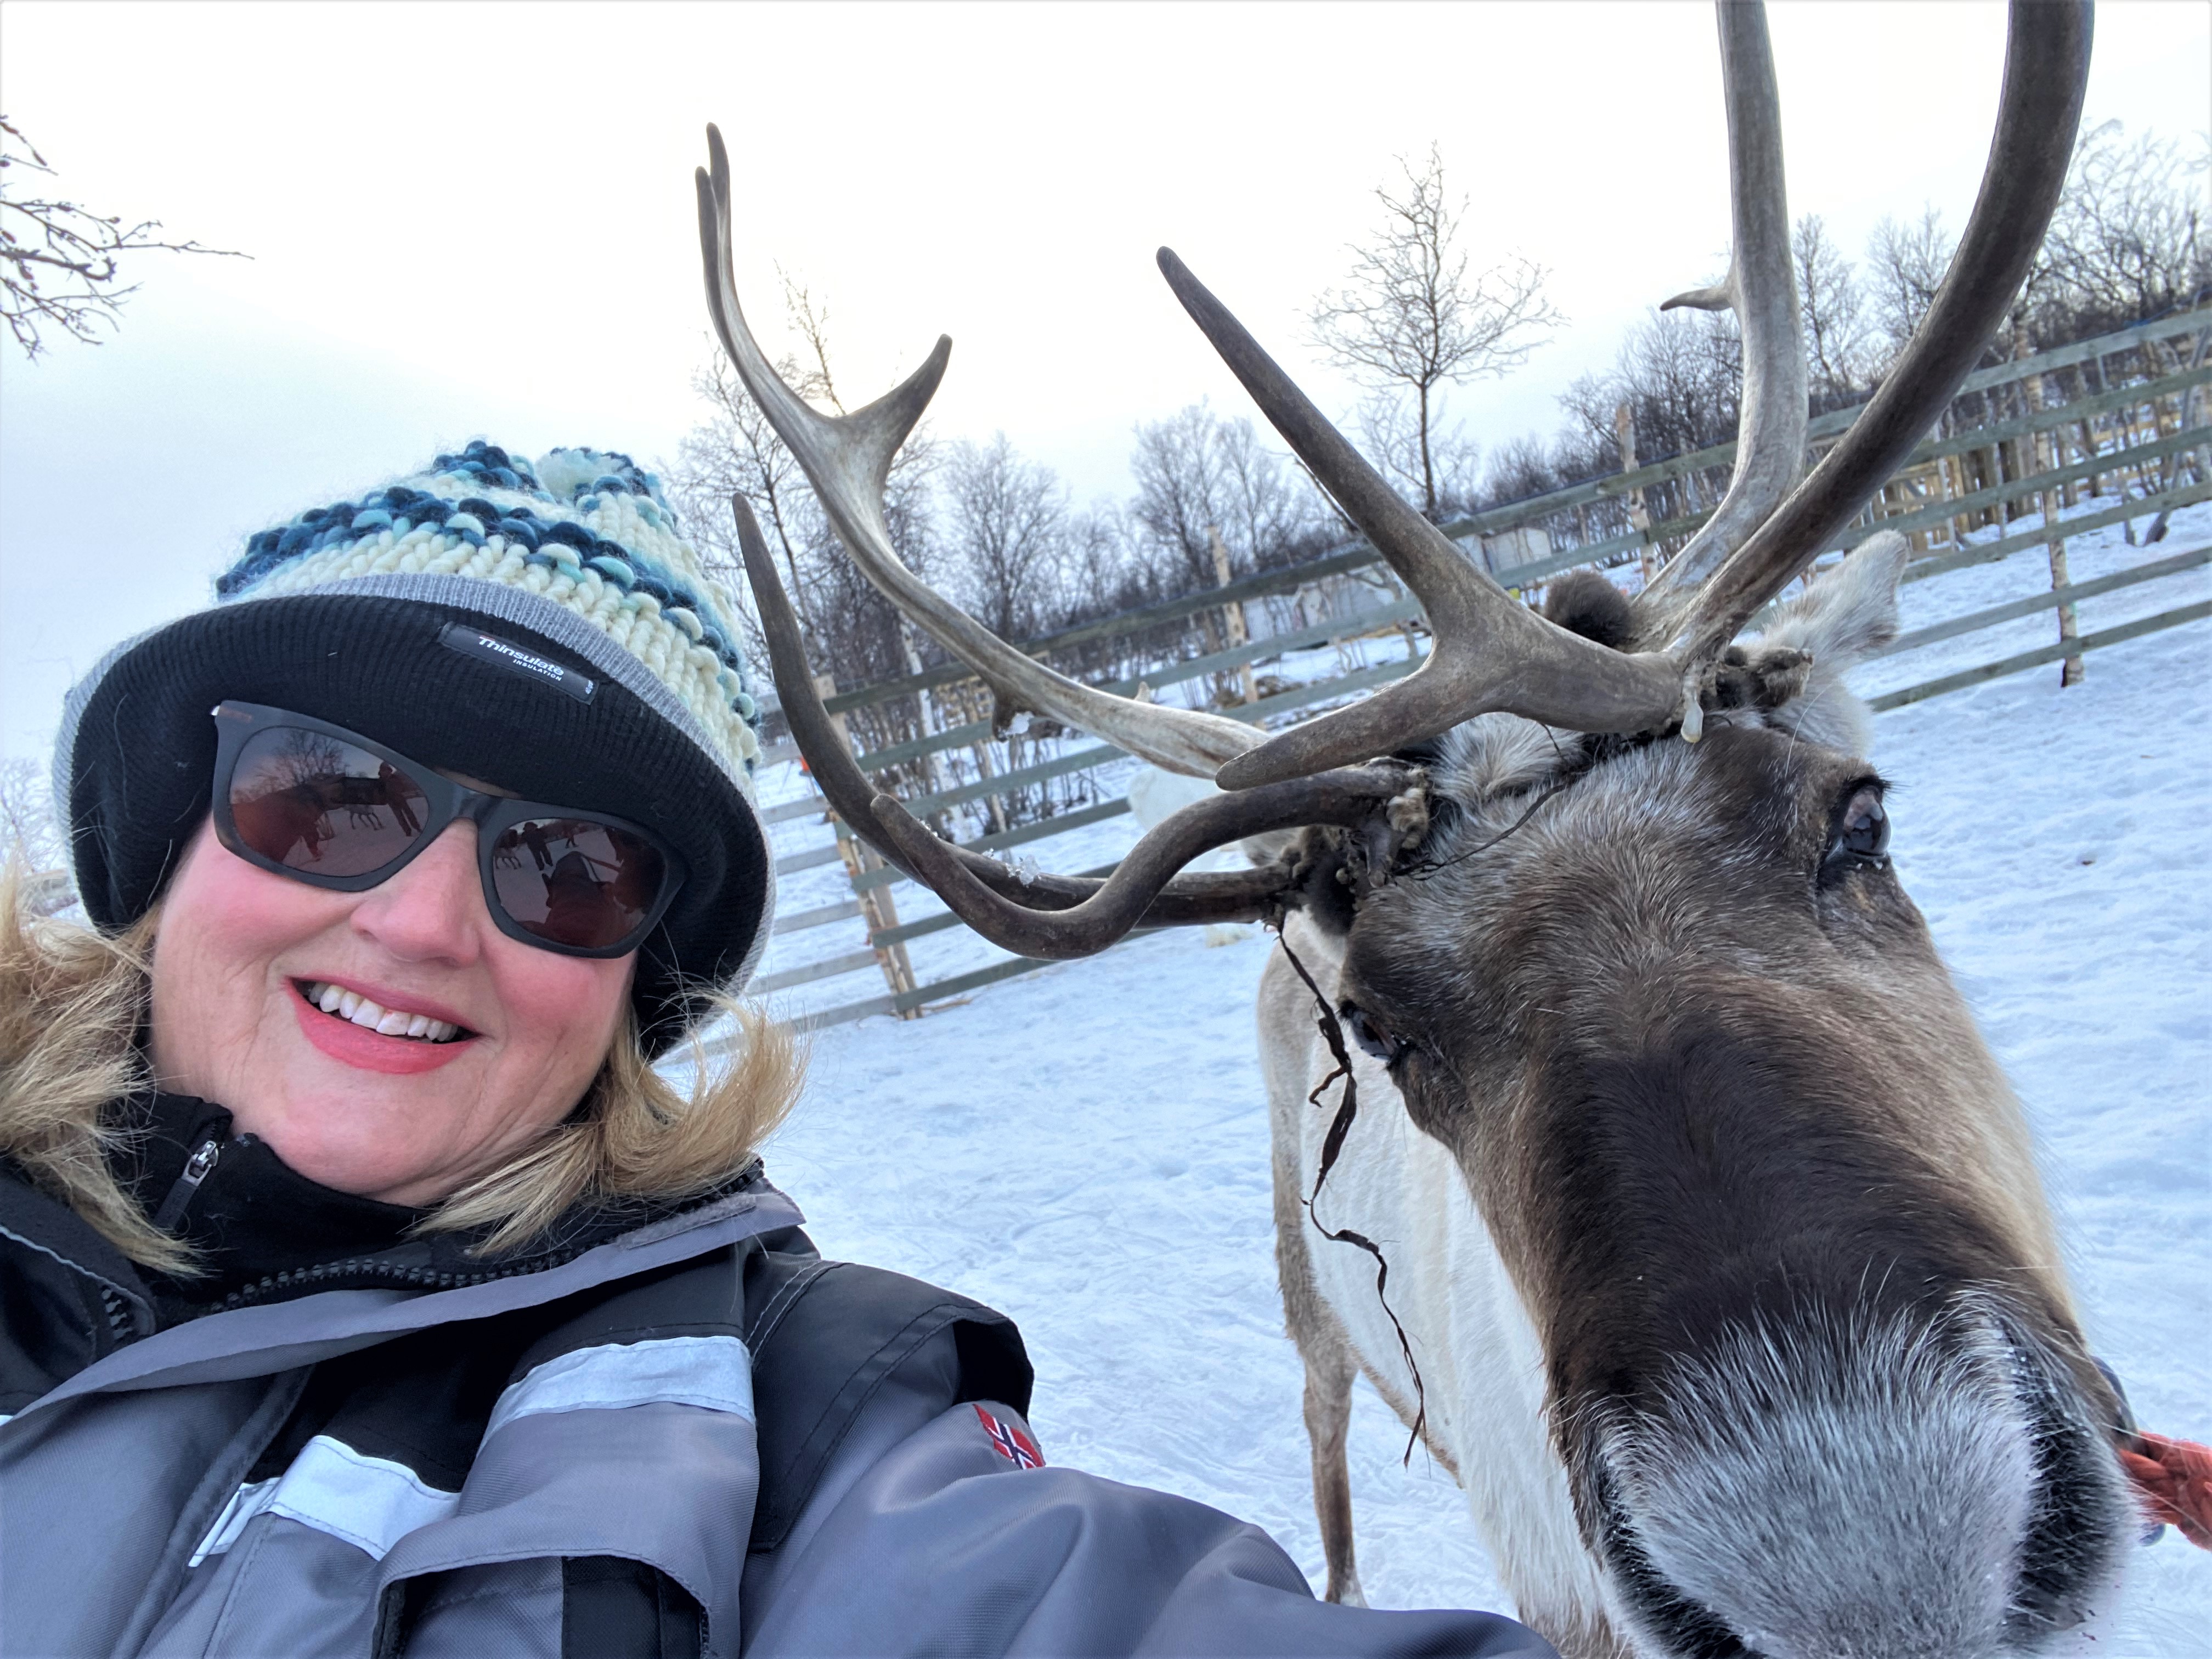 News from the Arctic Circle!